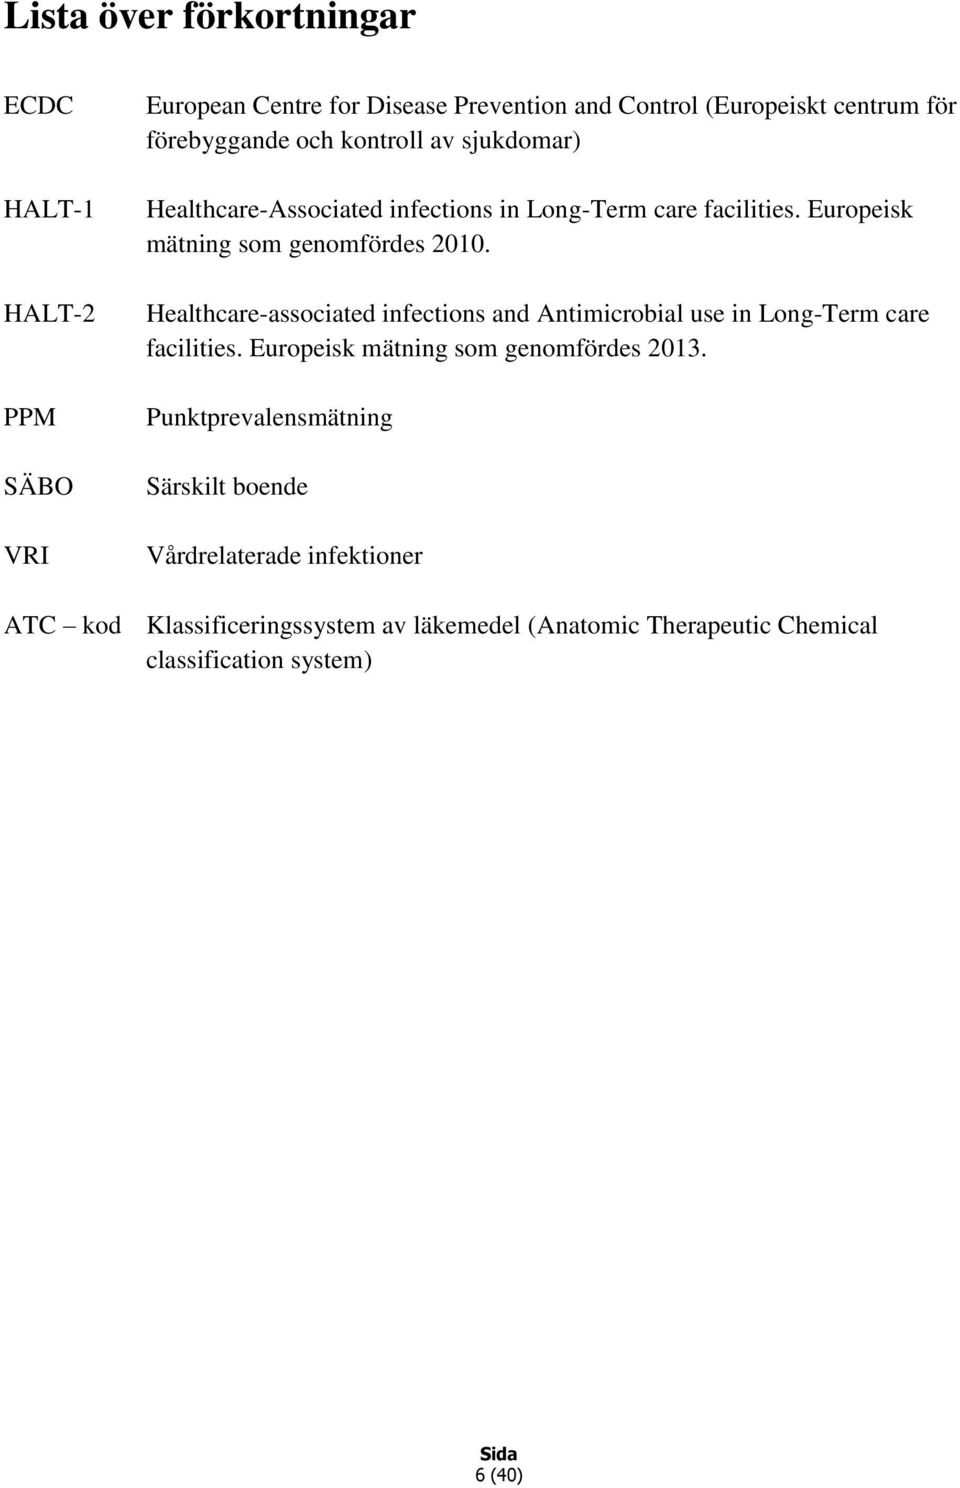 Healthcare-associated infections and Antimicrobial use in Long-Term care facilities. Europeisk mätning som genomfördes 2013.